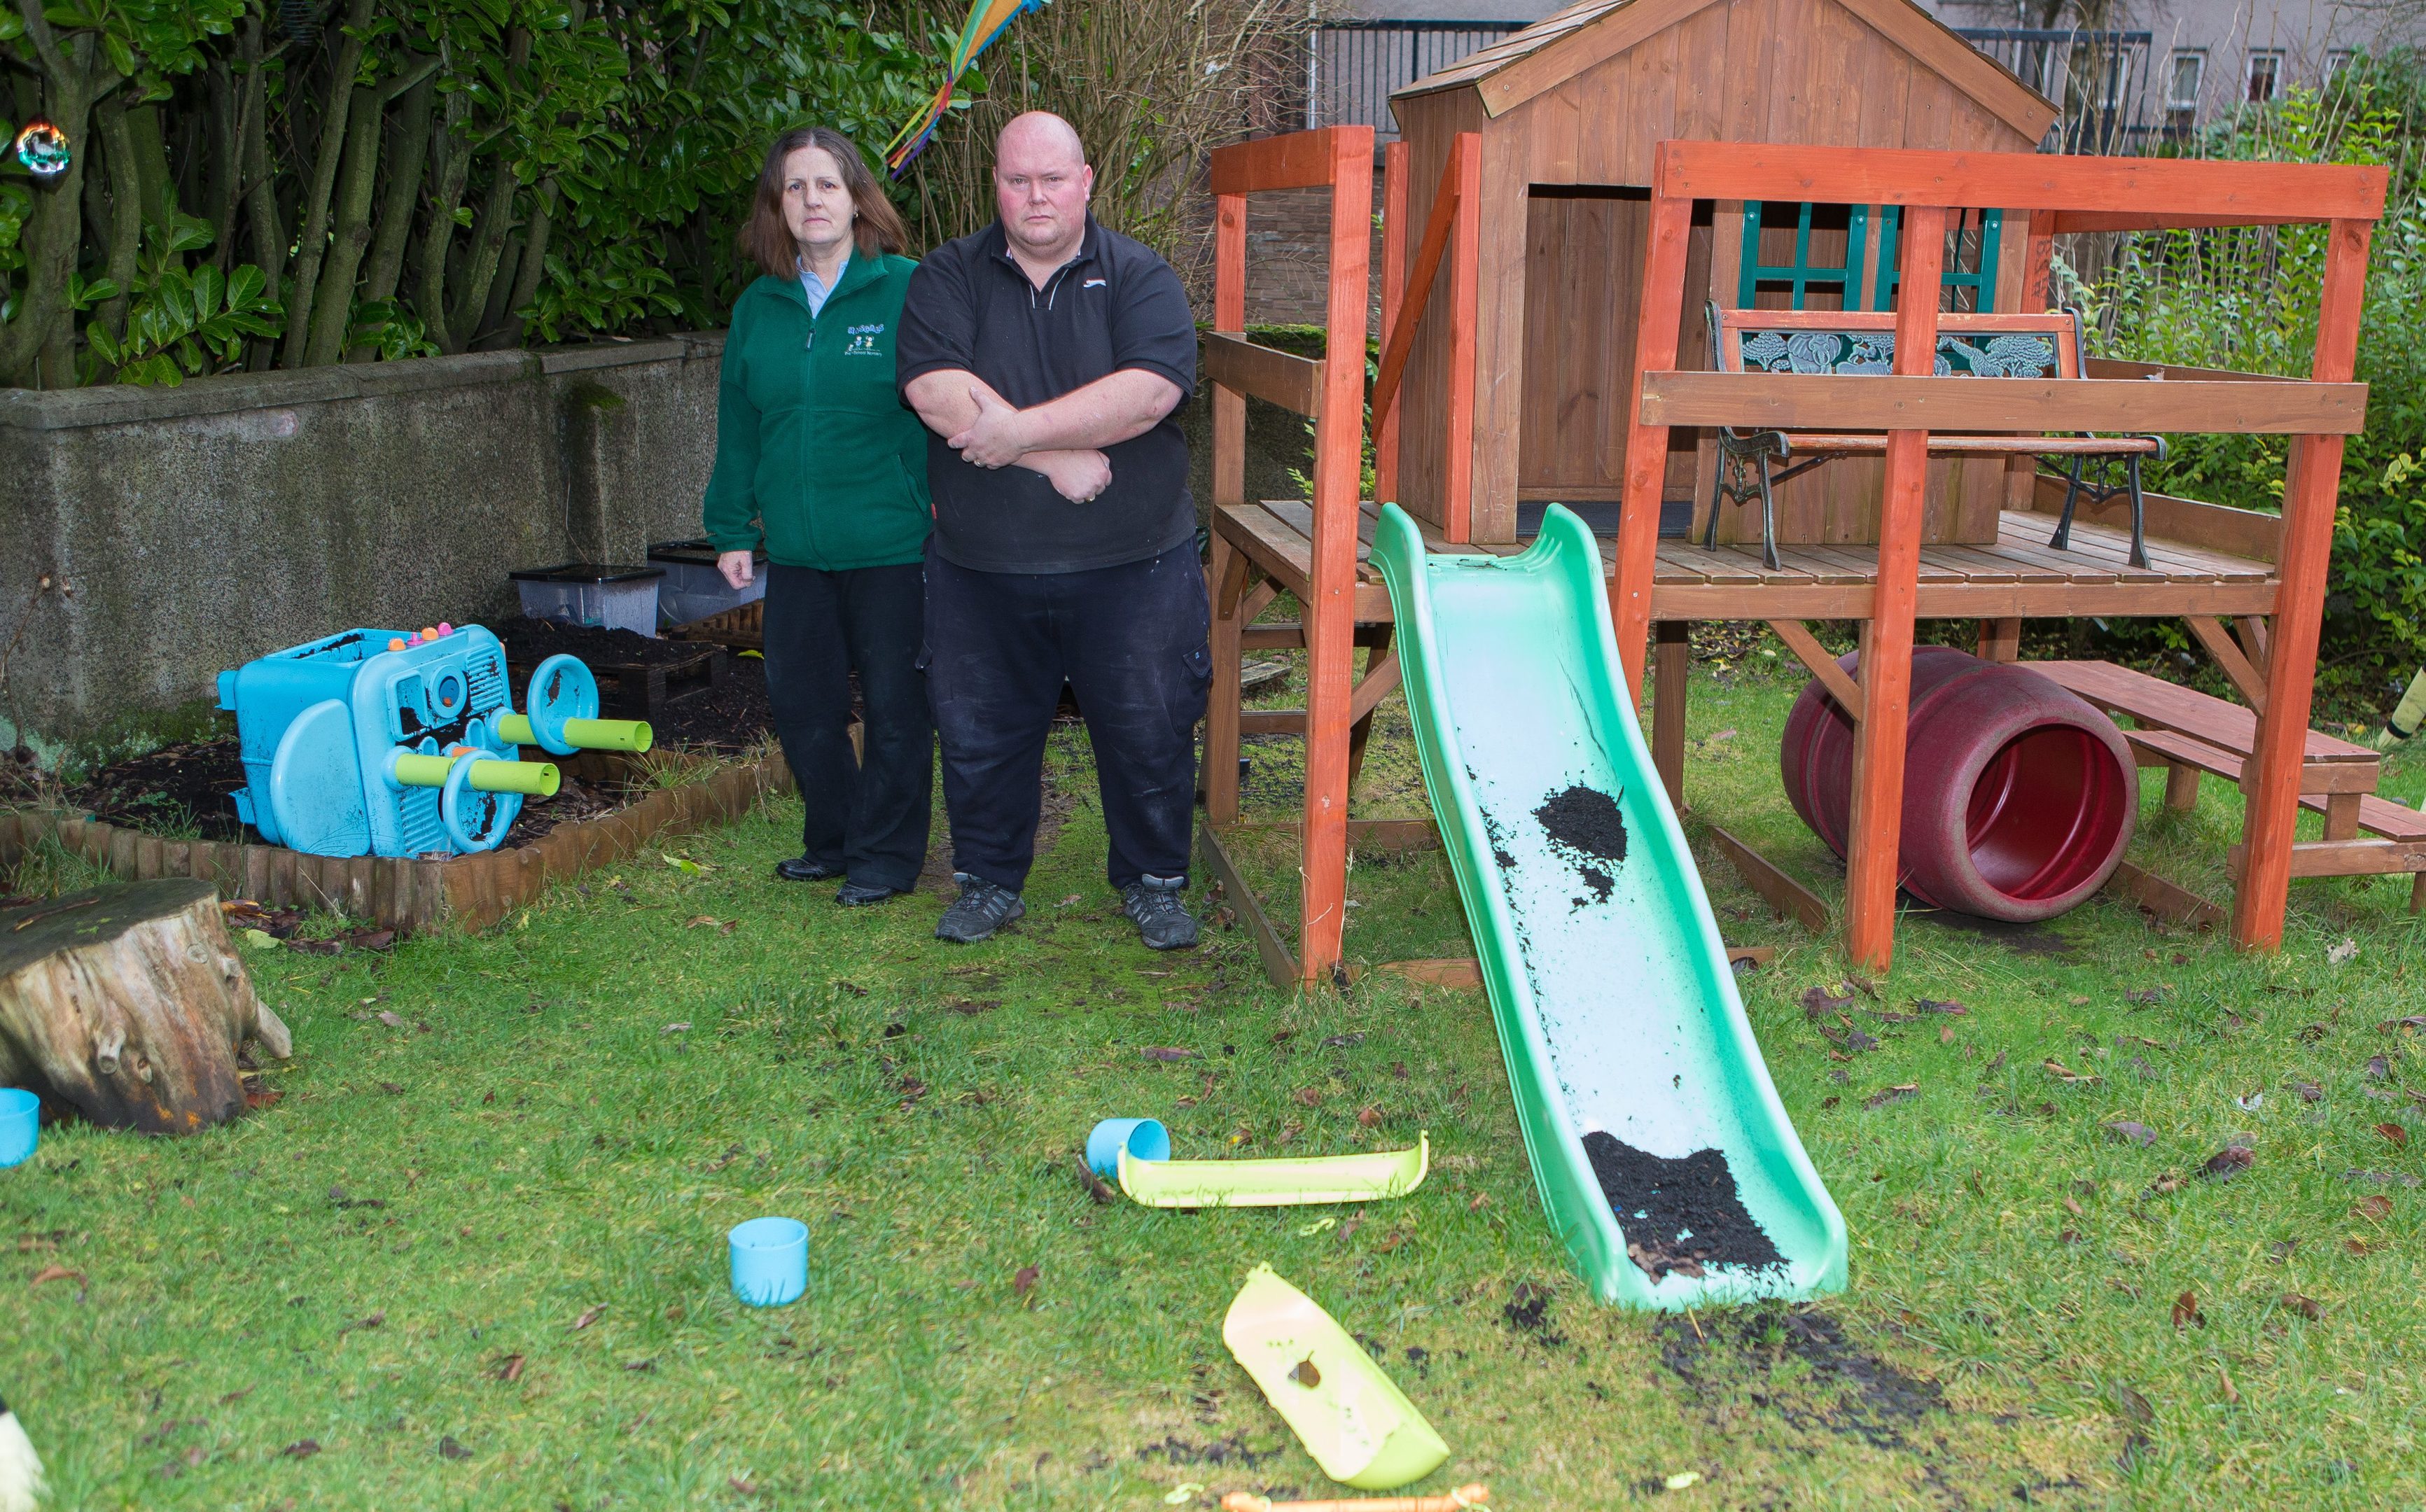 Owners June and Brian Miller of Rascals Nursery in Cowdenbeath were faced with a clean up after Christmas Day vandalism partially destroyed the garden for the children.